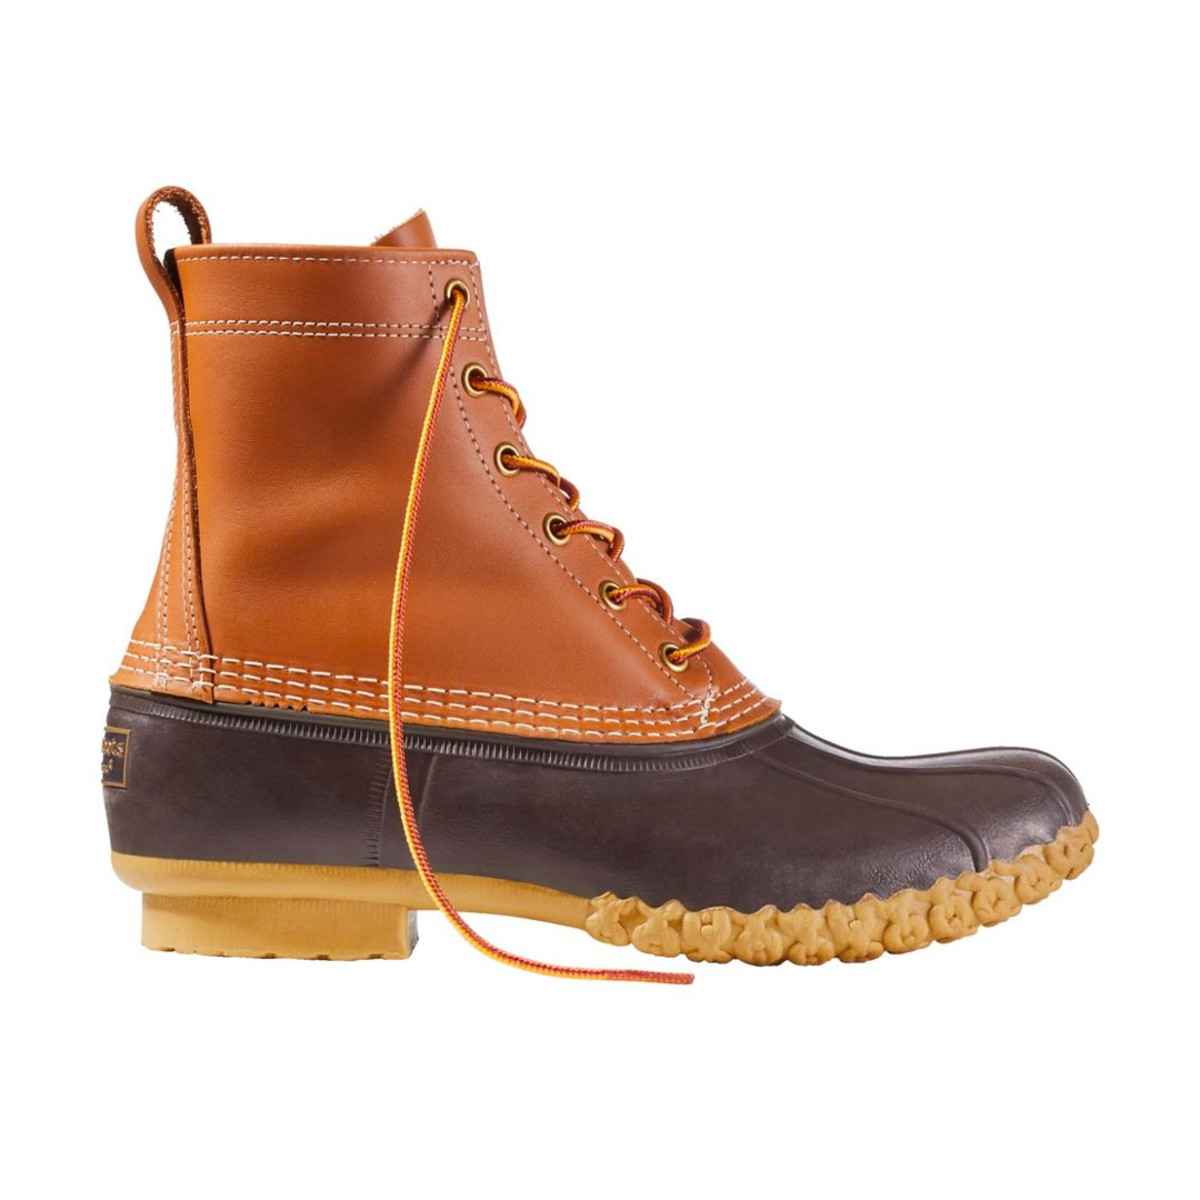 L.L.Bean's Winter Sale Is Live—Shop These 5 Items First - Men's Journal